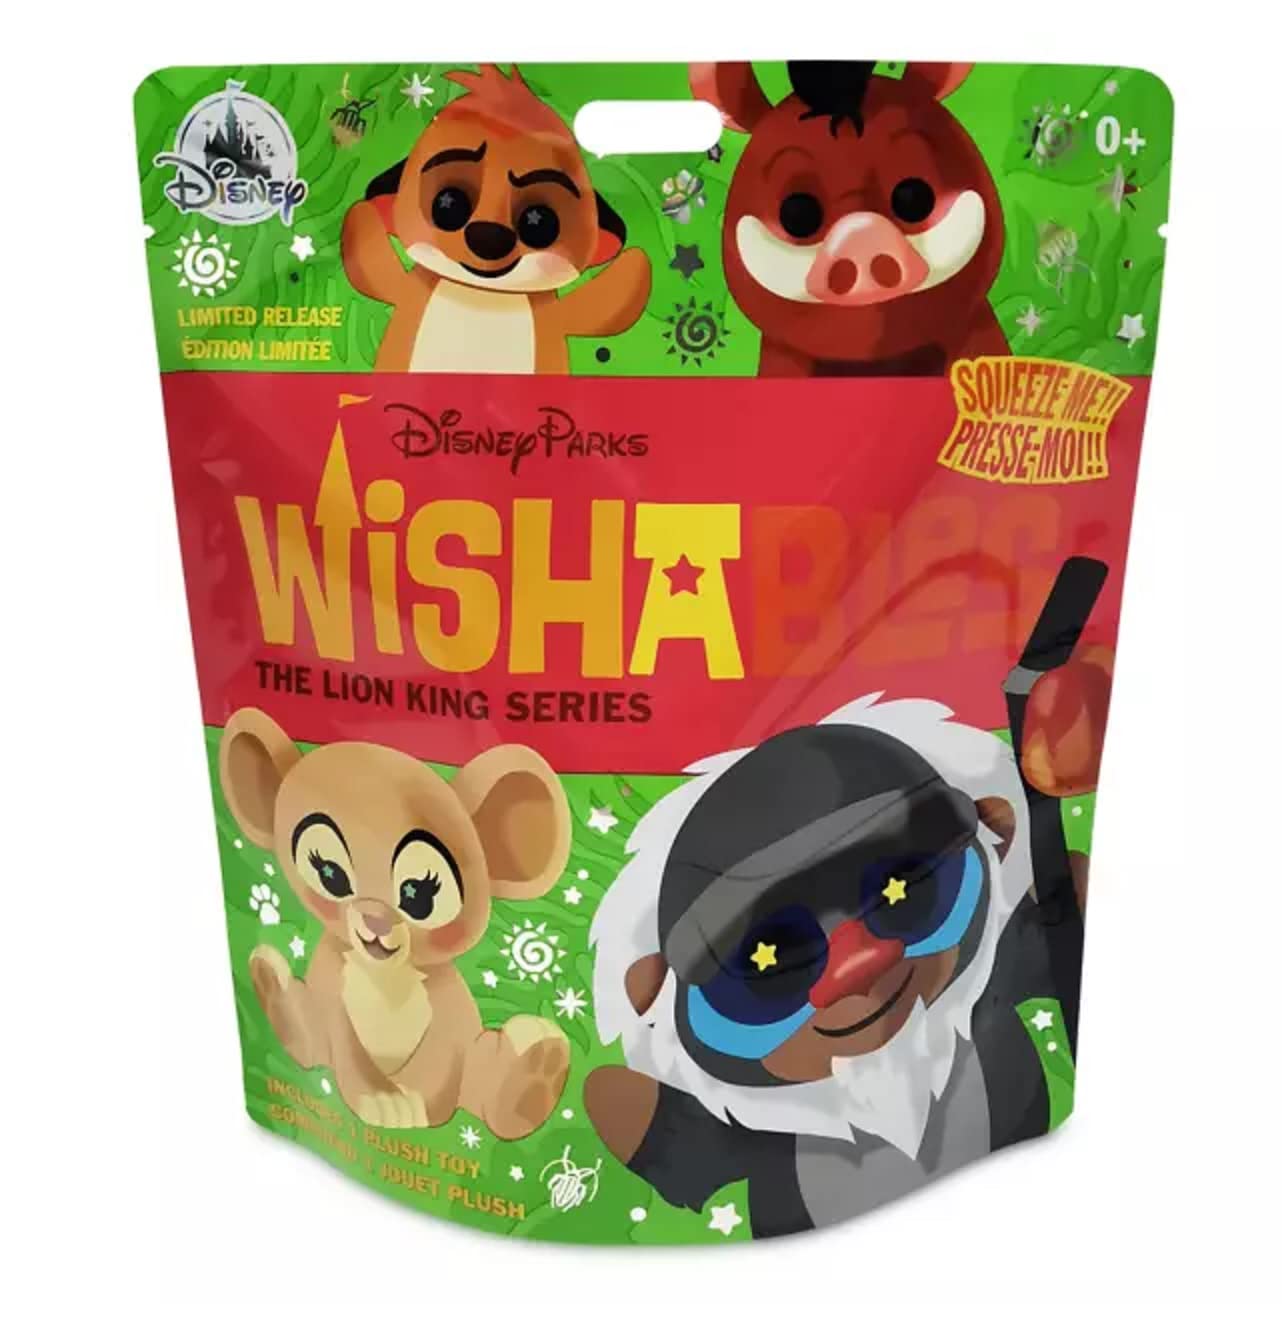 Ornaments Disney Parks Wishables Mystery Plush - The Lion King - 5 - Limited Release